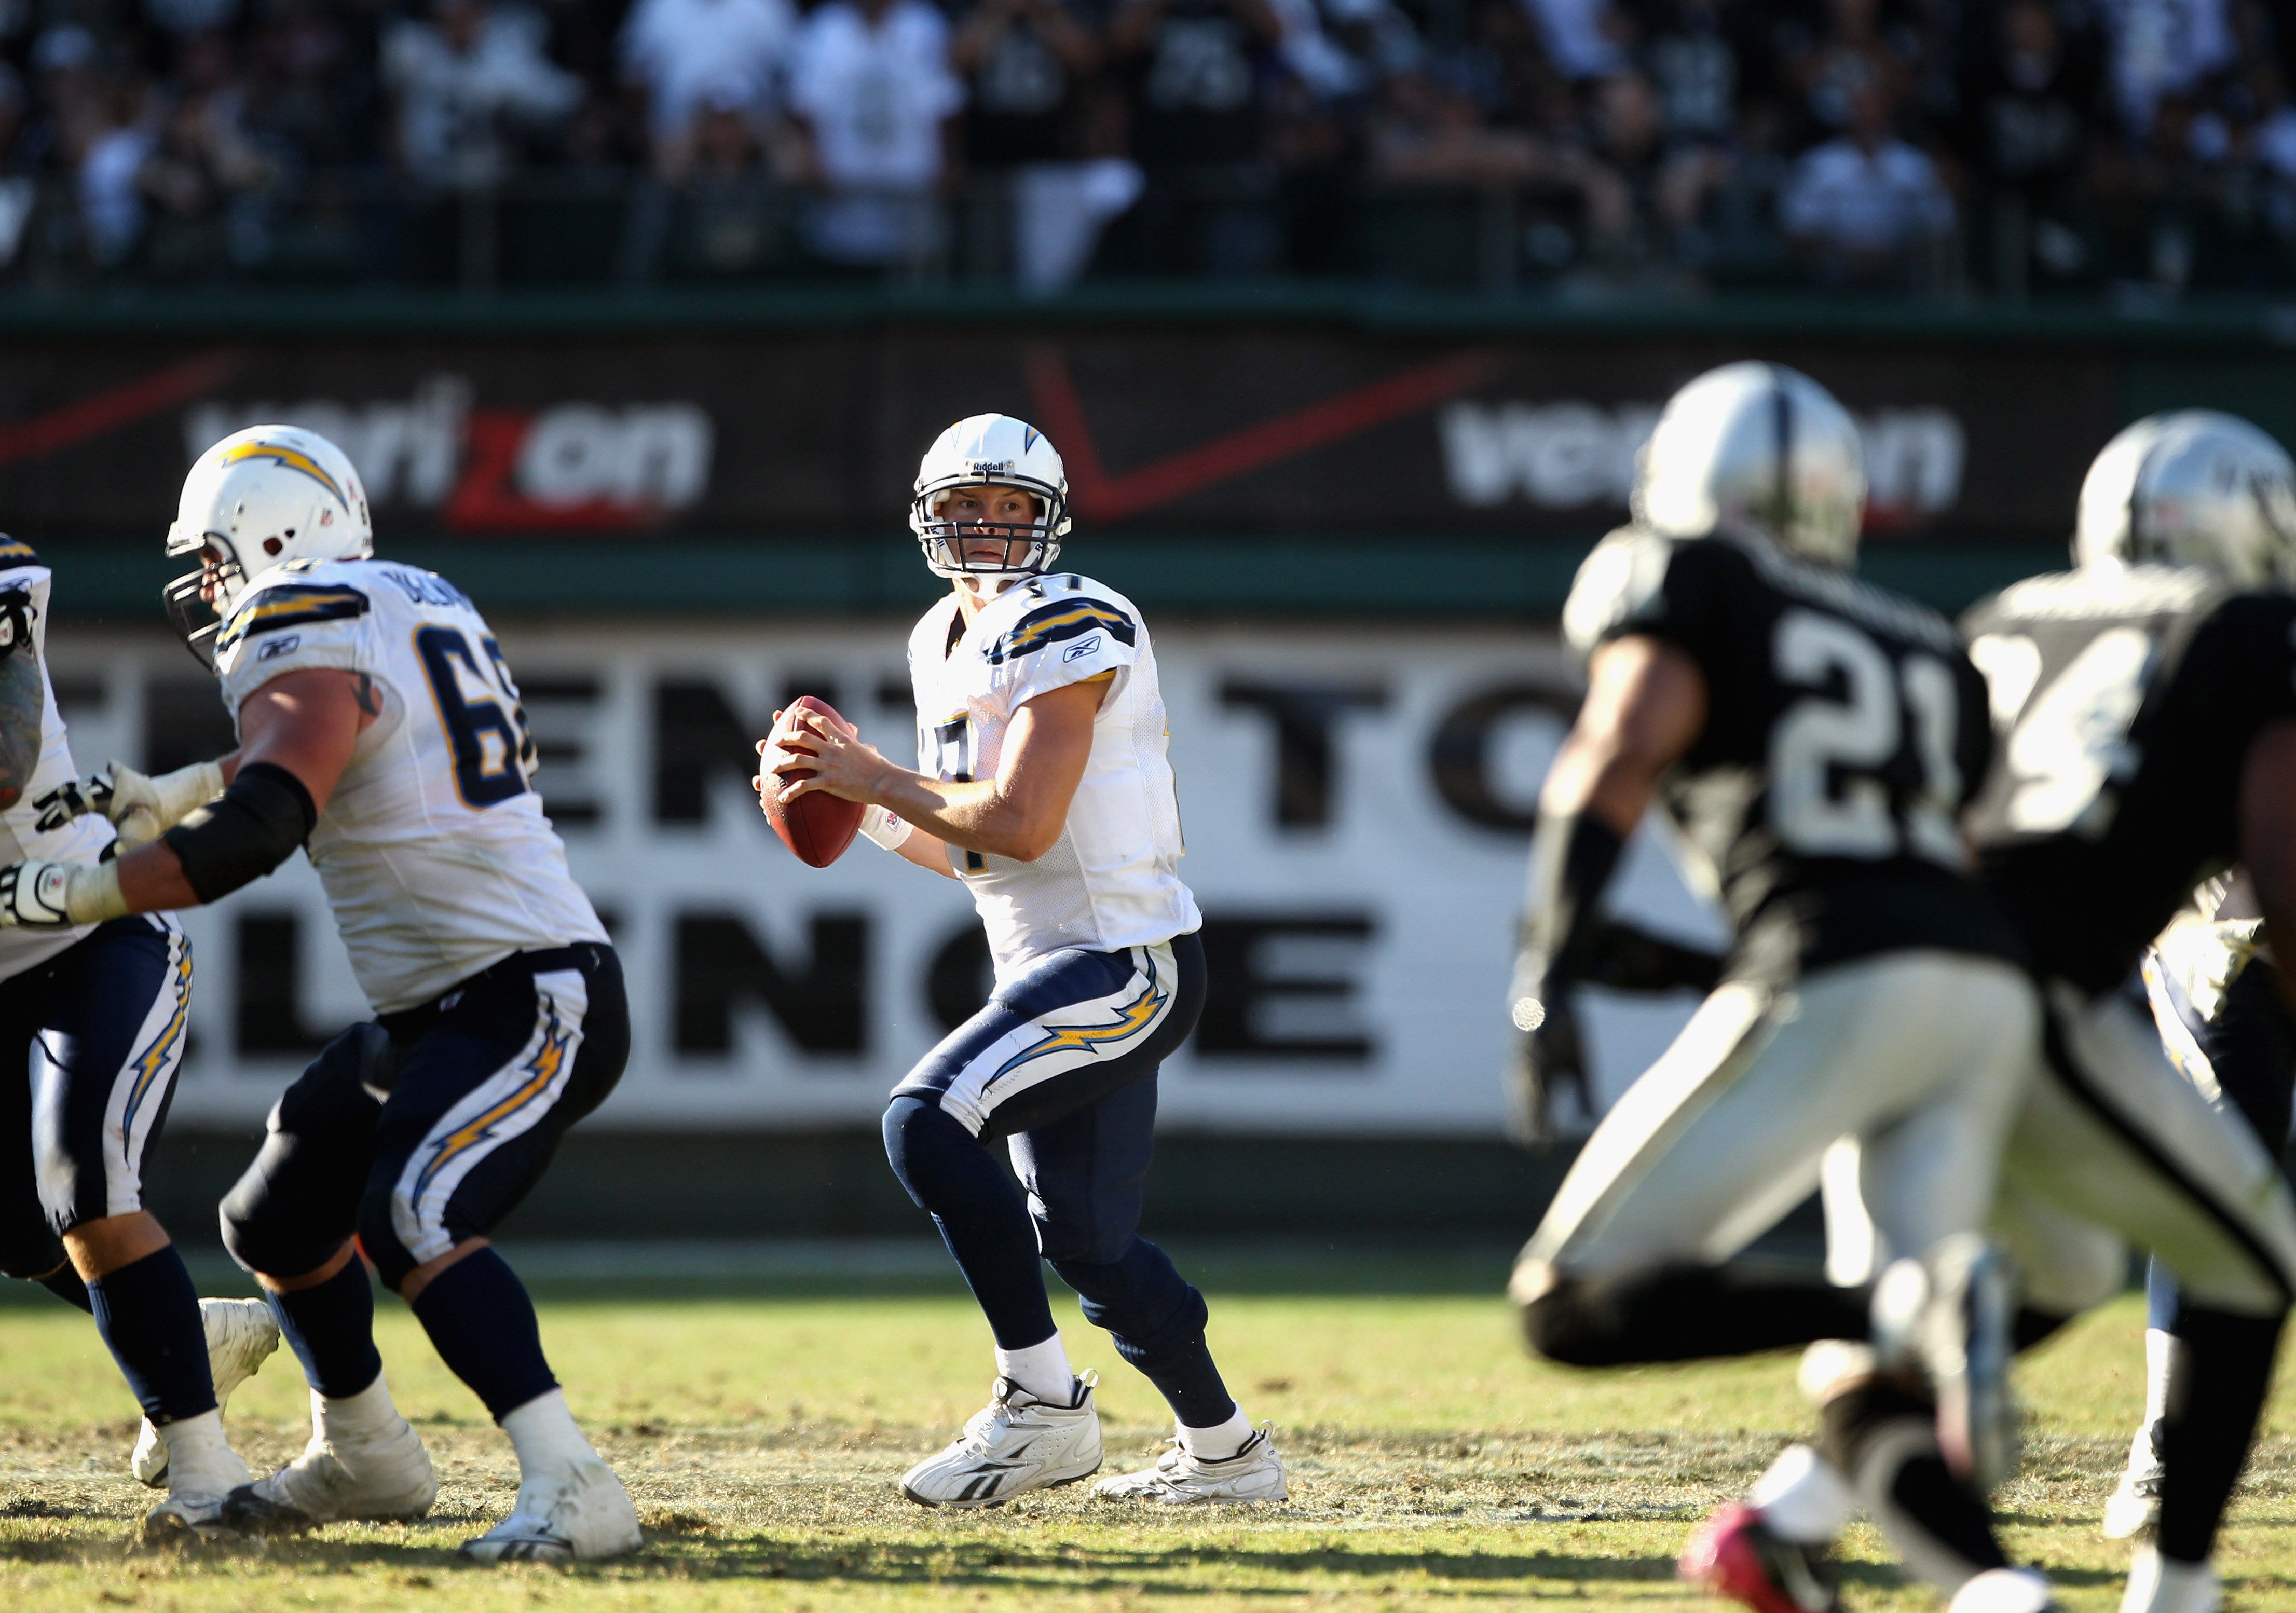 OAKLAND, CA - OCTOBER 10:  Philip Rivers #17 of the San Diego Chargers drops back to pass against the Oakland Raiders at Oakland-Alameda County Coliseum on October 10, 2010 in Oakland, California.  (Photo by Ezra Shaw/Getty Images)